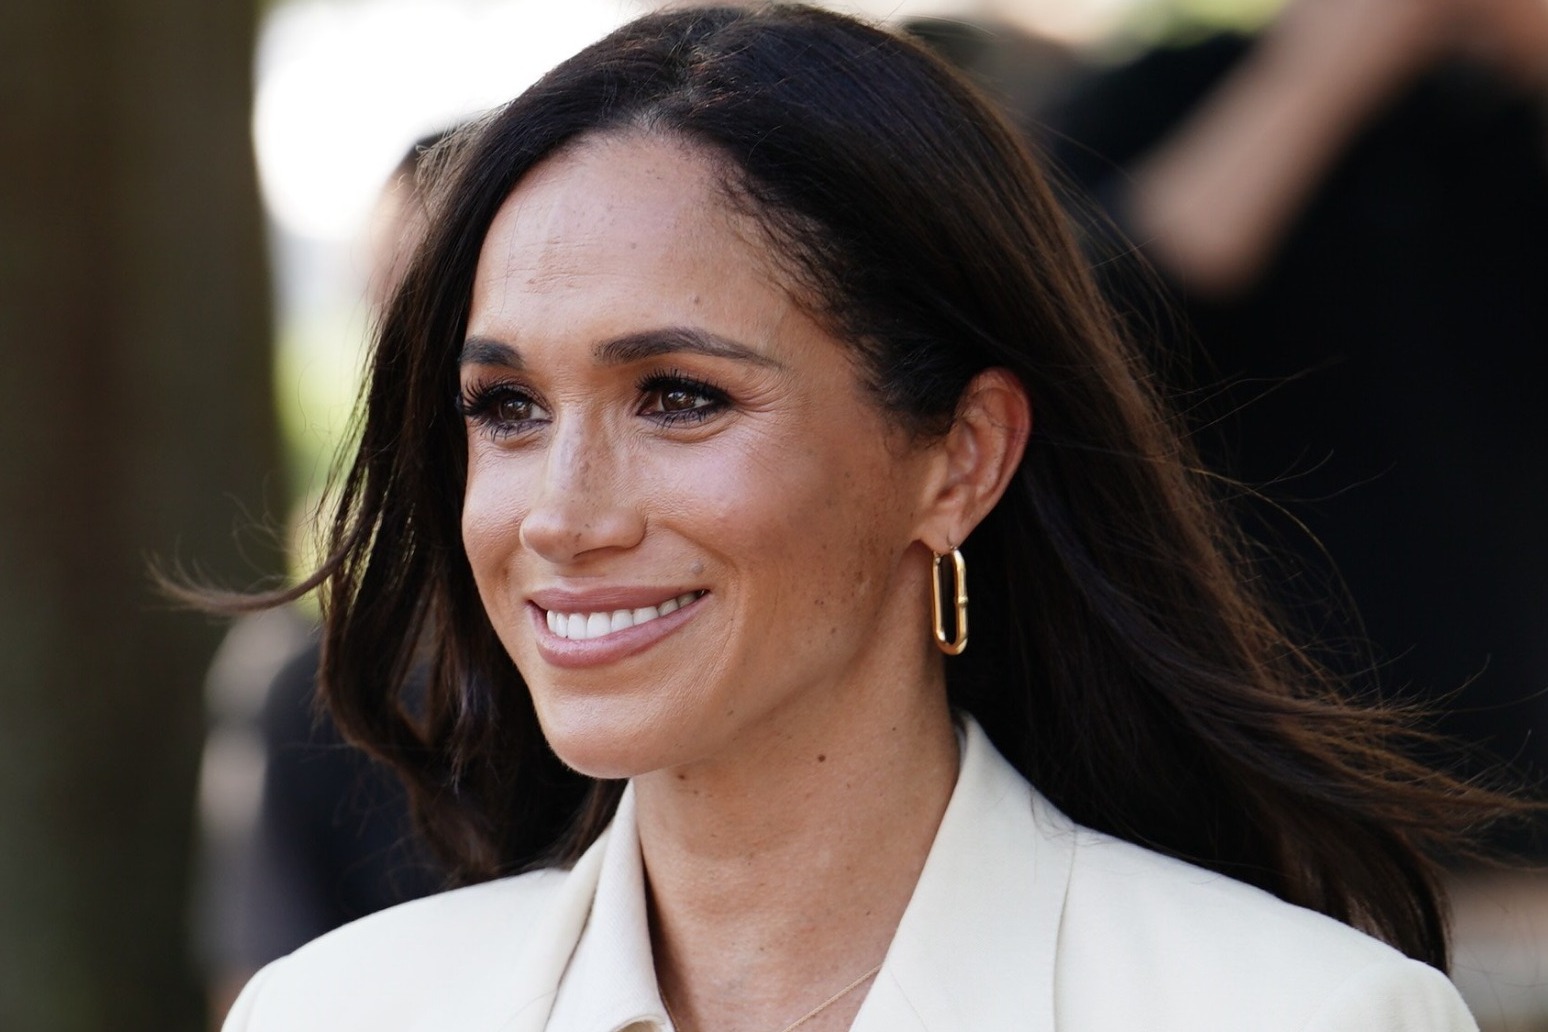 Author of upcoming royal book says he did not interview Meghan for it 